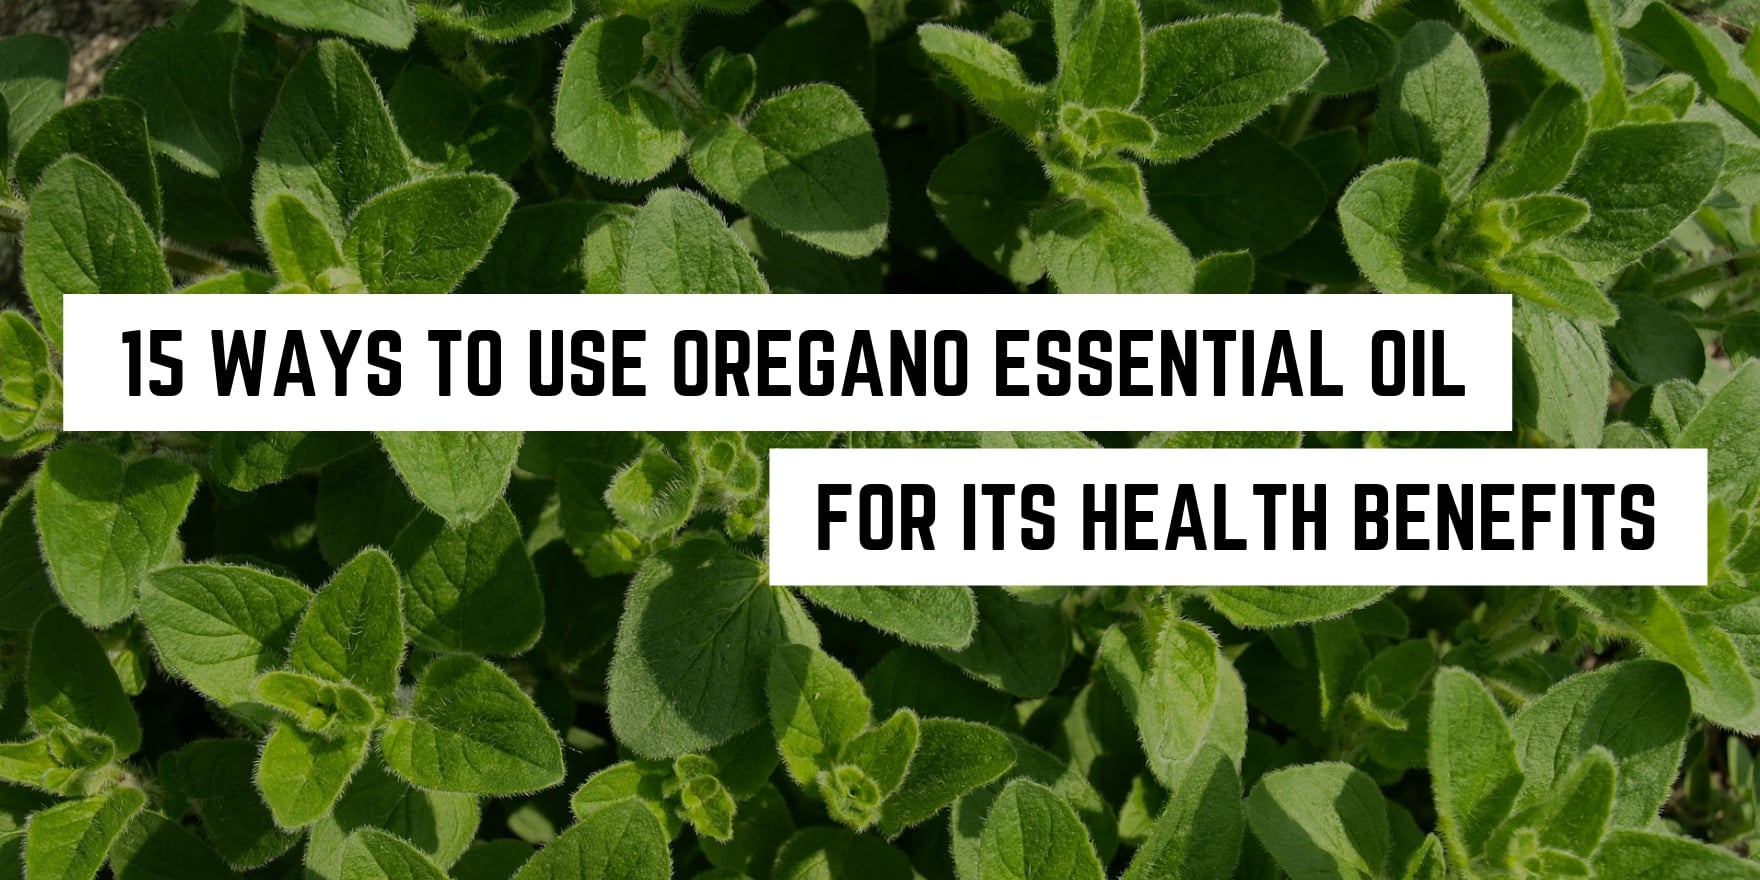 A bed of fresh oregano leaves with the text overlay "15 spiritual ways to use oregano essential oil for its health benefits.